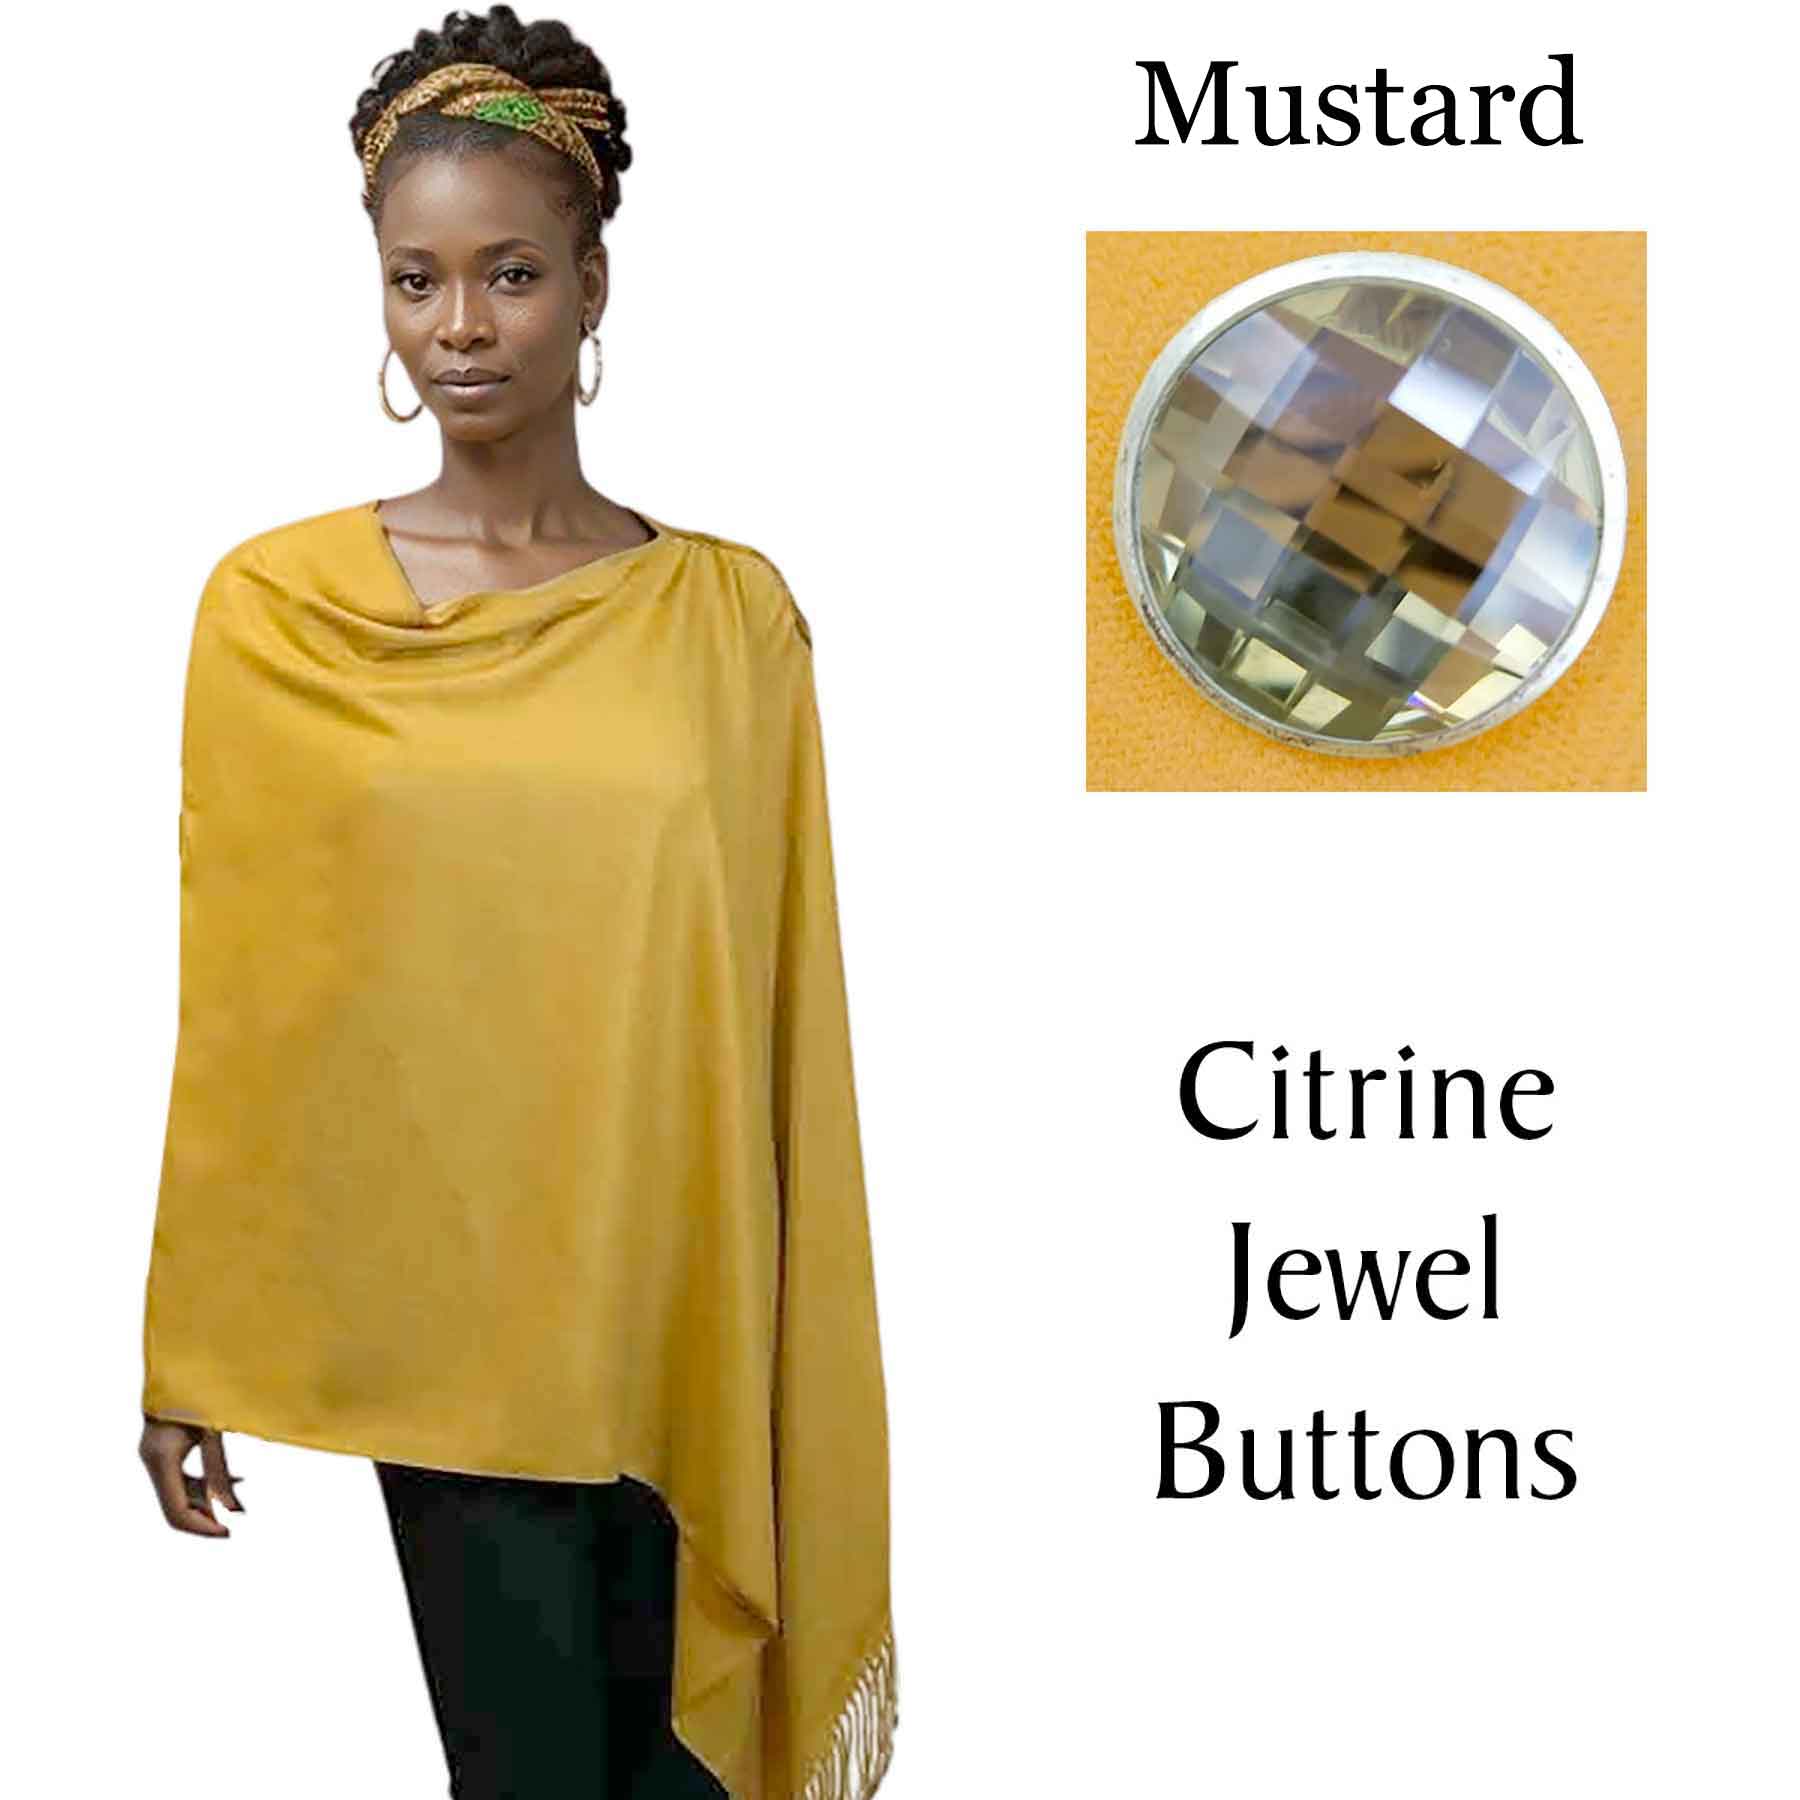 #12 Mustard with Citrine Jewel Buttons